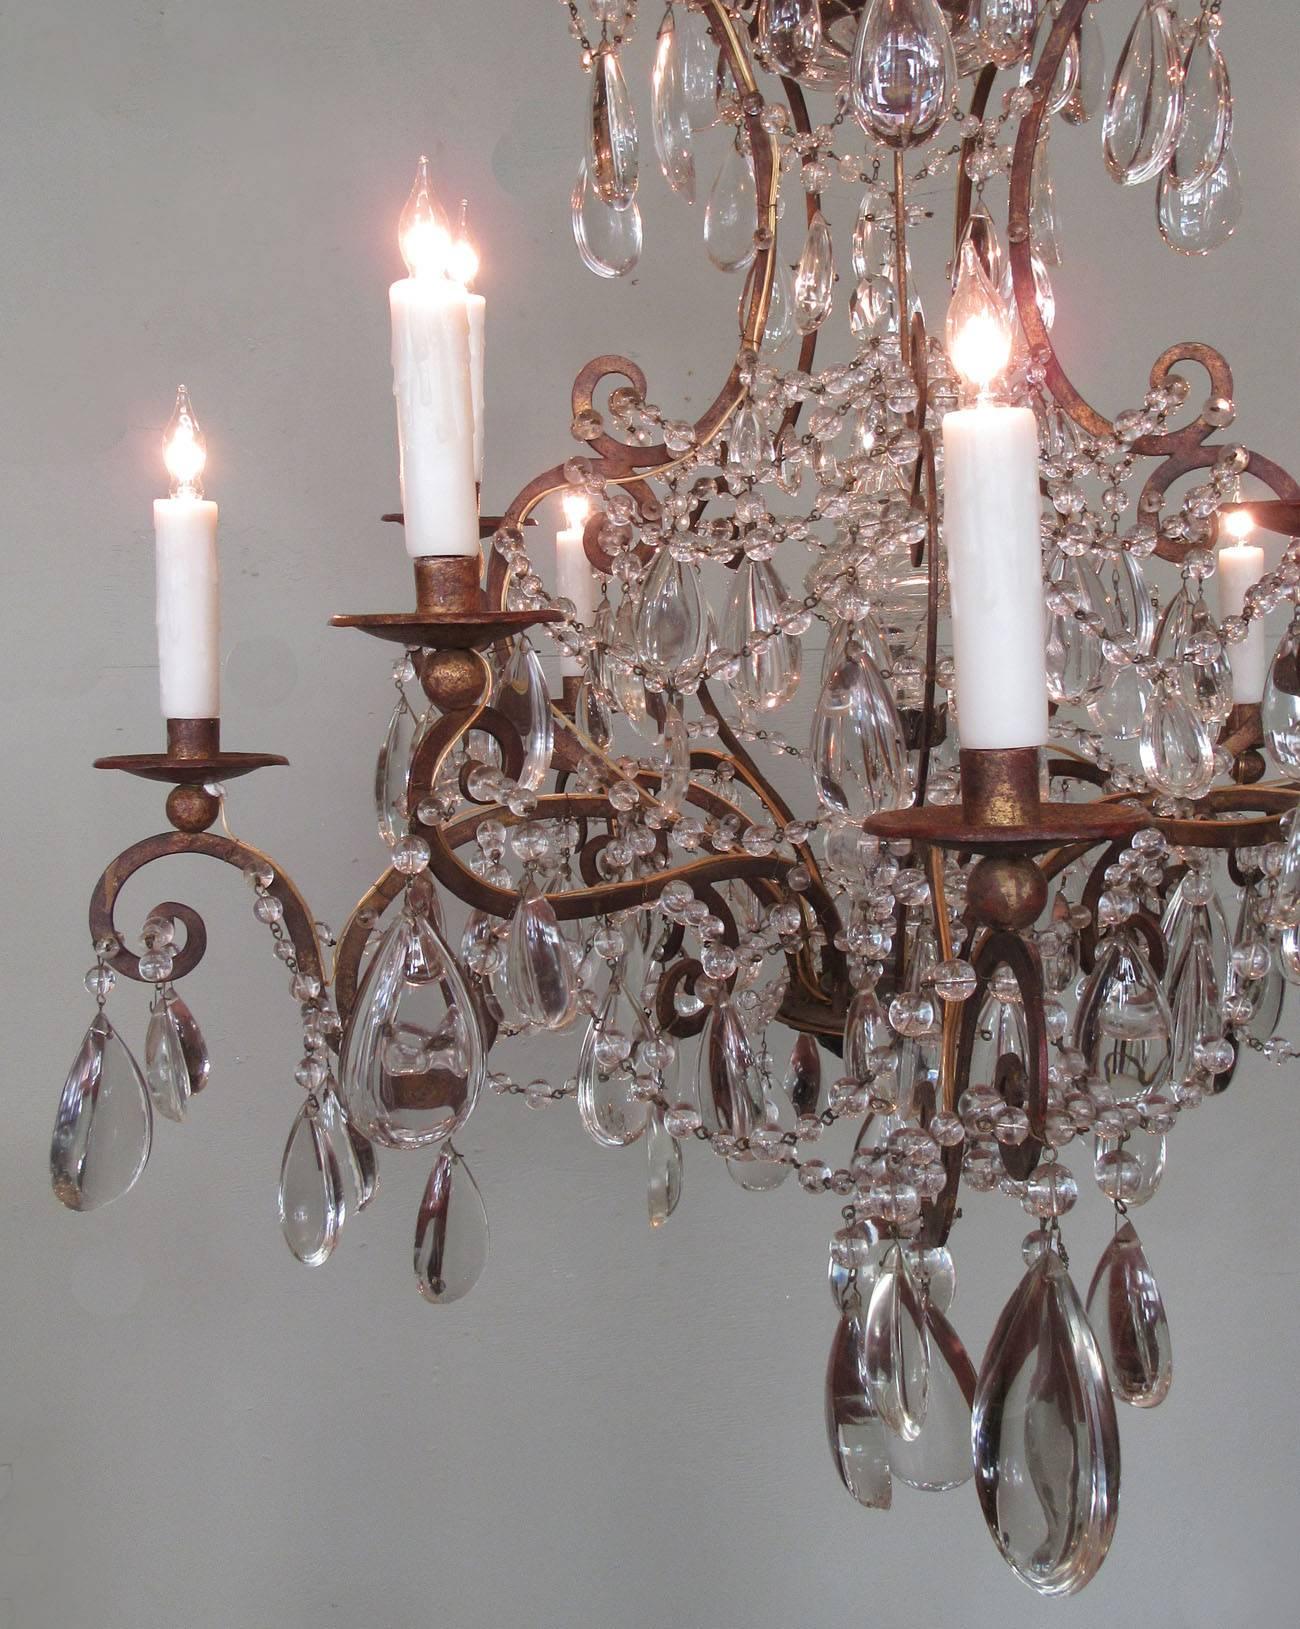 A pair of Italian piedmont gilt tole, beaded crystal and polished crystal pendant chandeliers, circa 1820, featuring ten candle arms. They have been rewired with new porcelain sockets and are available for sale individually or as a pair.